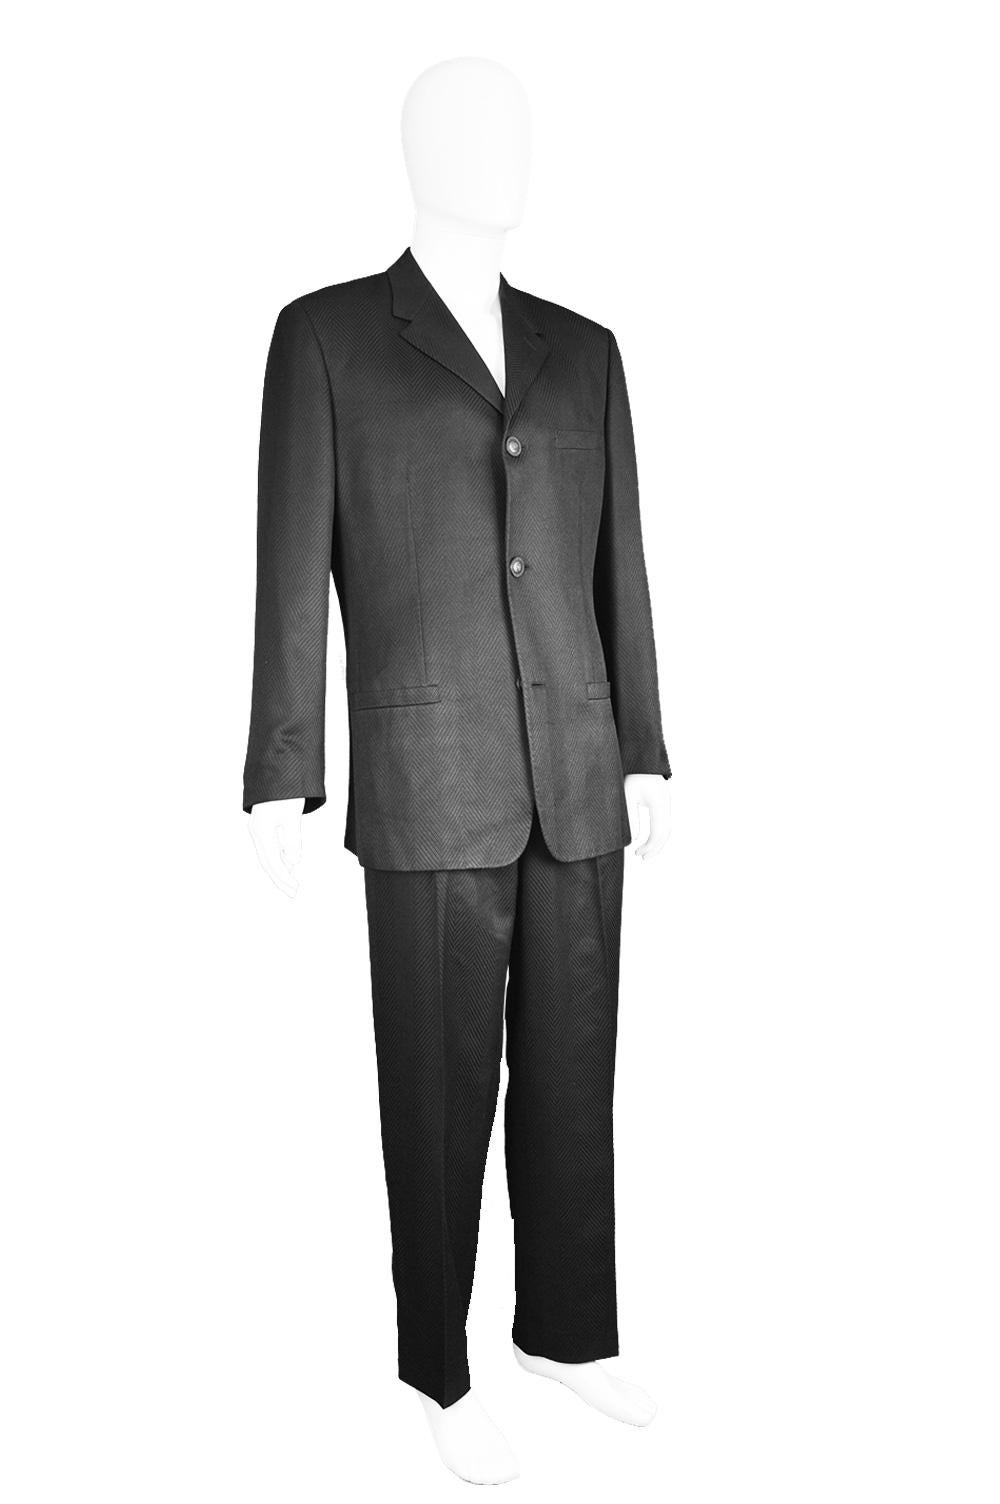 Gianni Versace Men's Black 100% Silk Jacquard 2 Piece Vintage Suit, 1990s In Good Condition For Sale In Doncaster, South Yorkshire